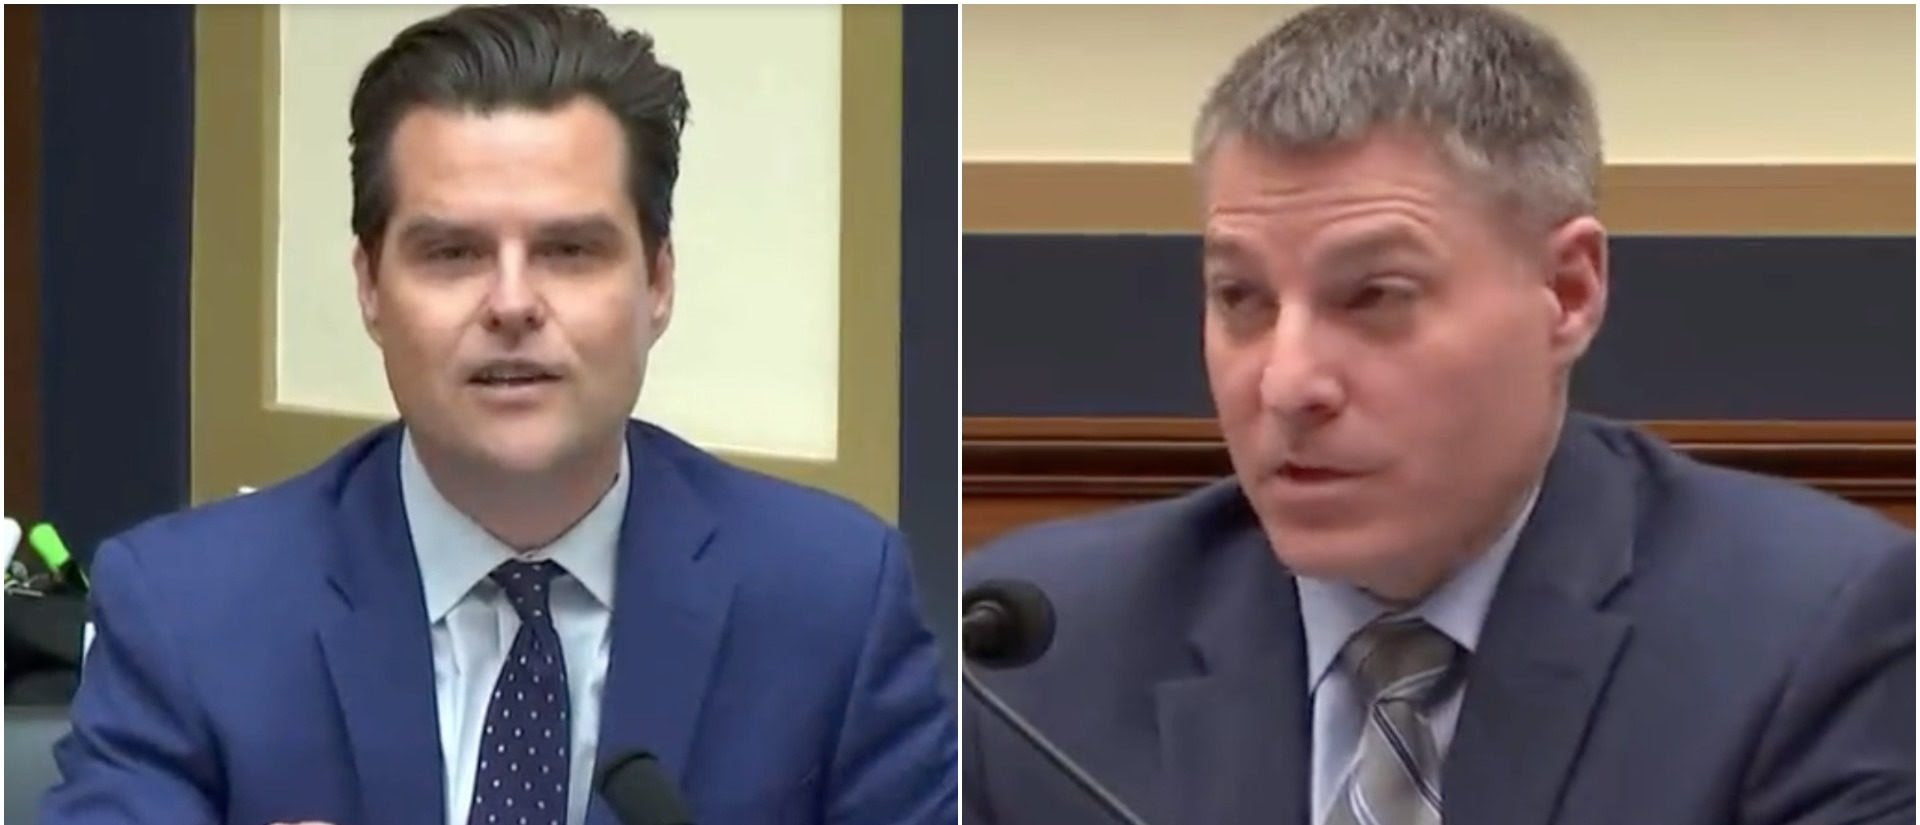 Matt Gaetz Confronts FBI Official On Whereabouts Of Hunter Biden’s Laptop, Enters It Into Congressional Record